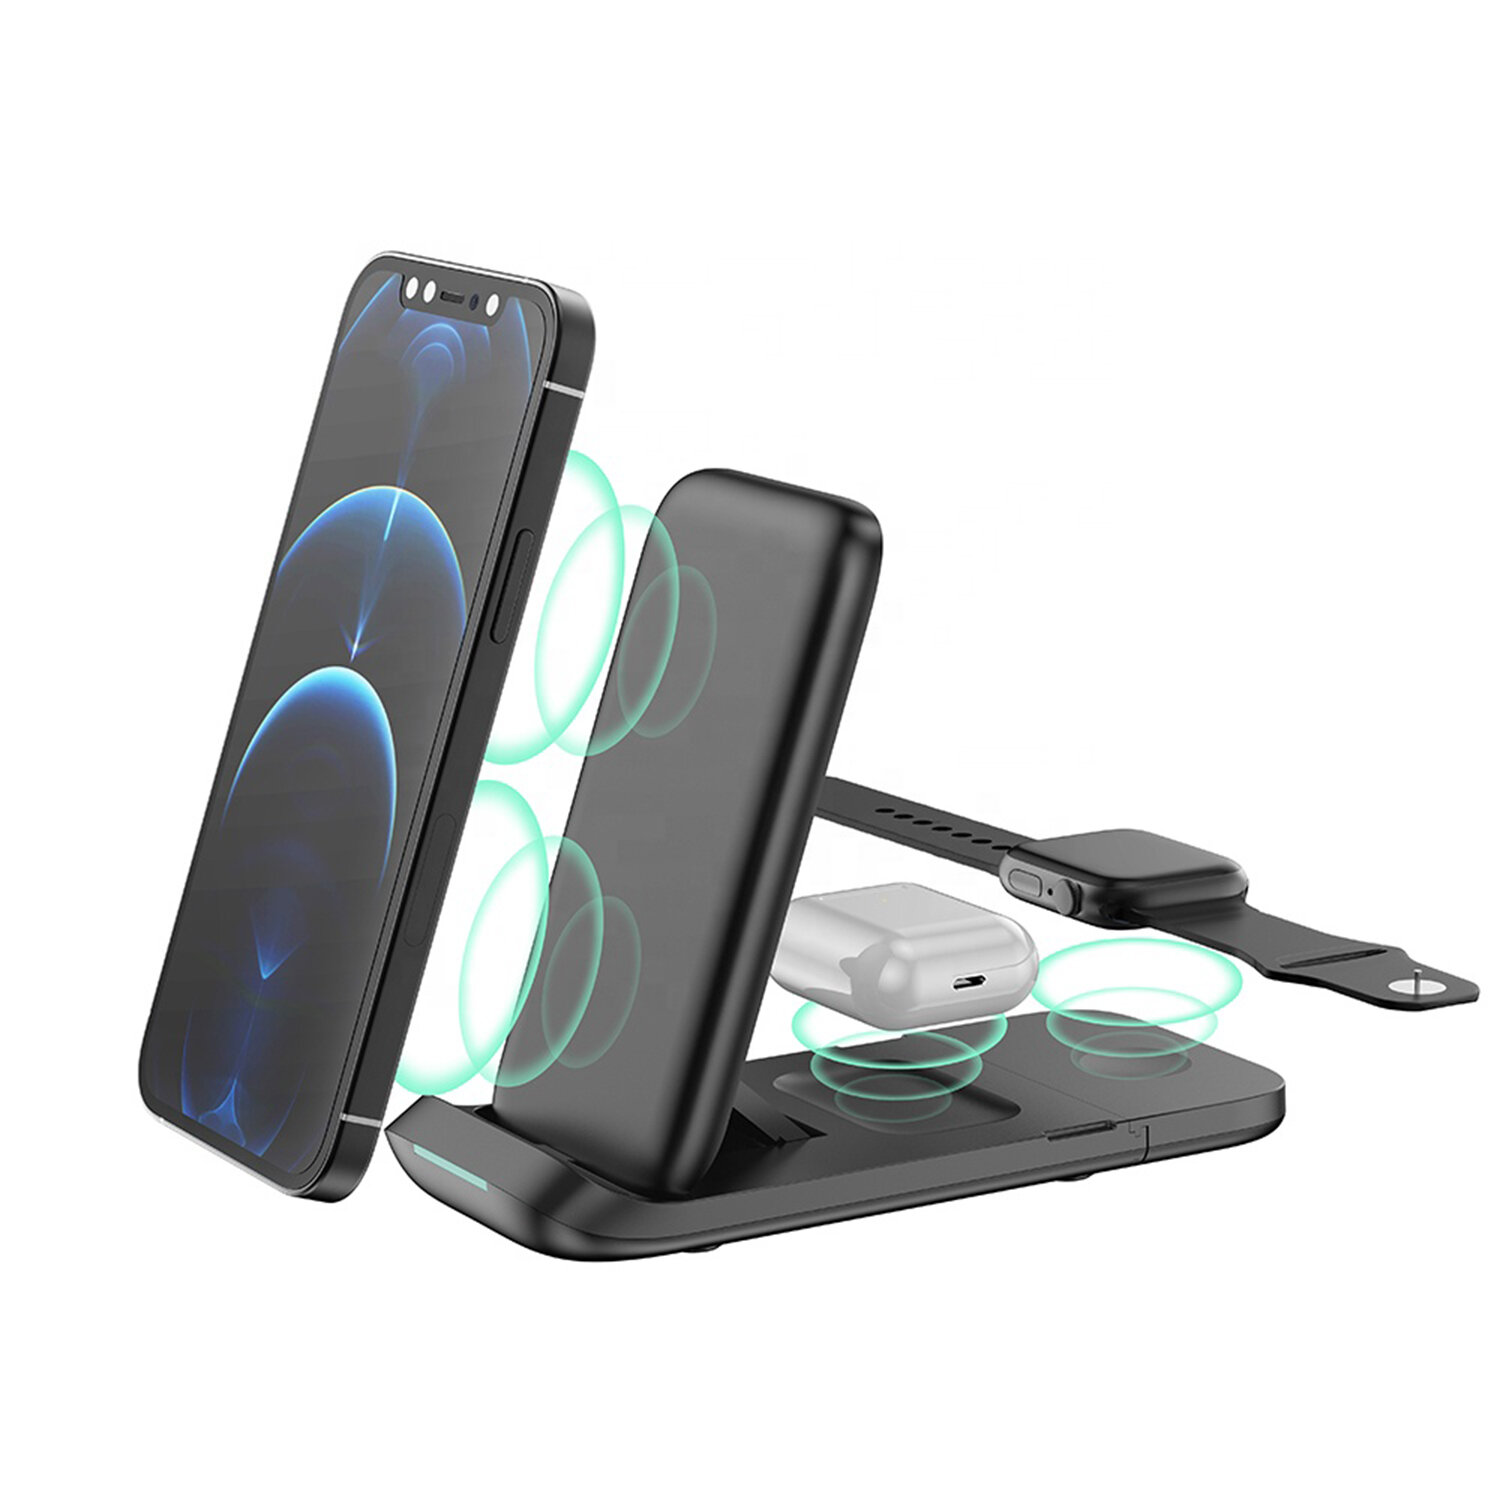 Bakeey HS-V8 Folding 3-in-1 Wireless Charger 15W Fast Charging Vertical Stand For iPhone 13 Pro Max 